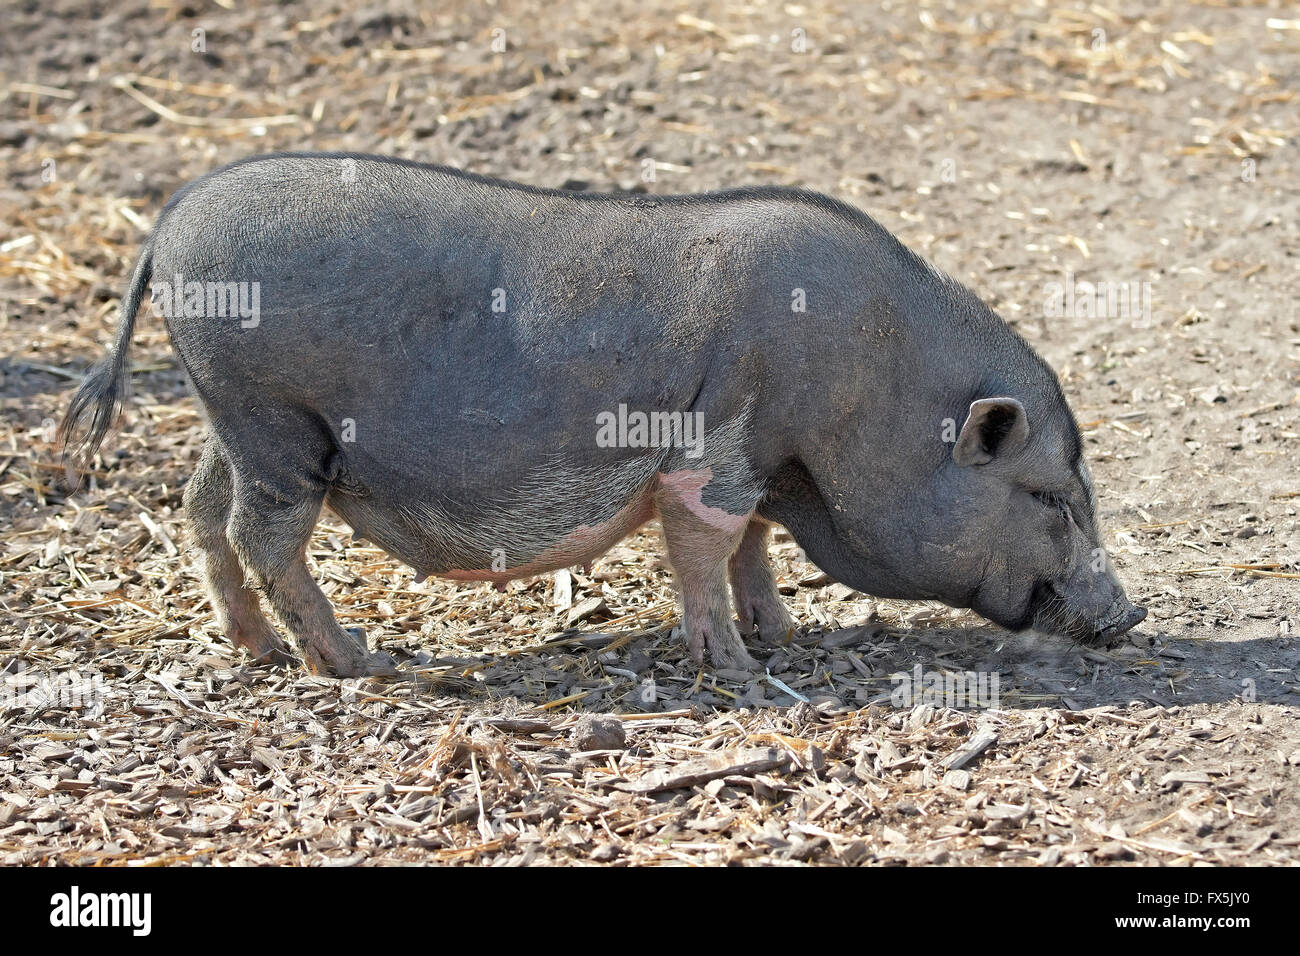 Pot bellied pig looking for food in the dirt Stock Photo